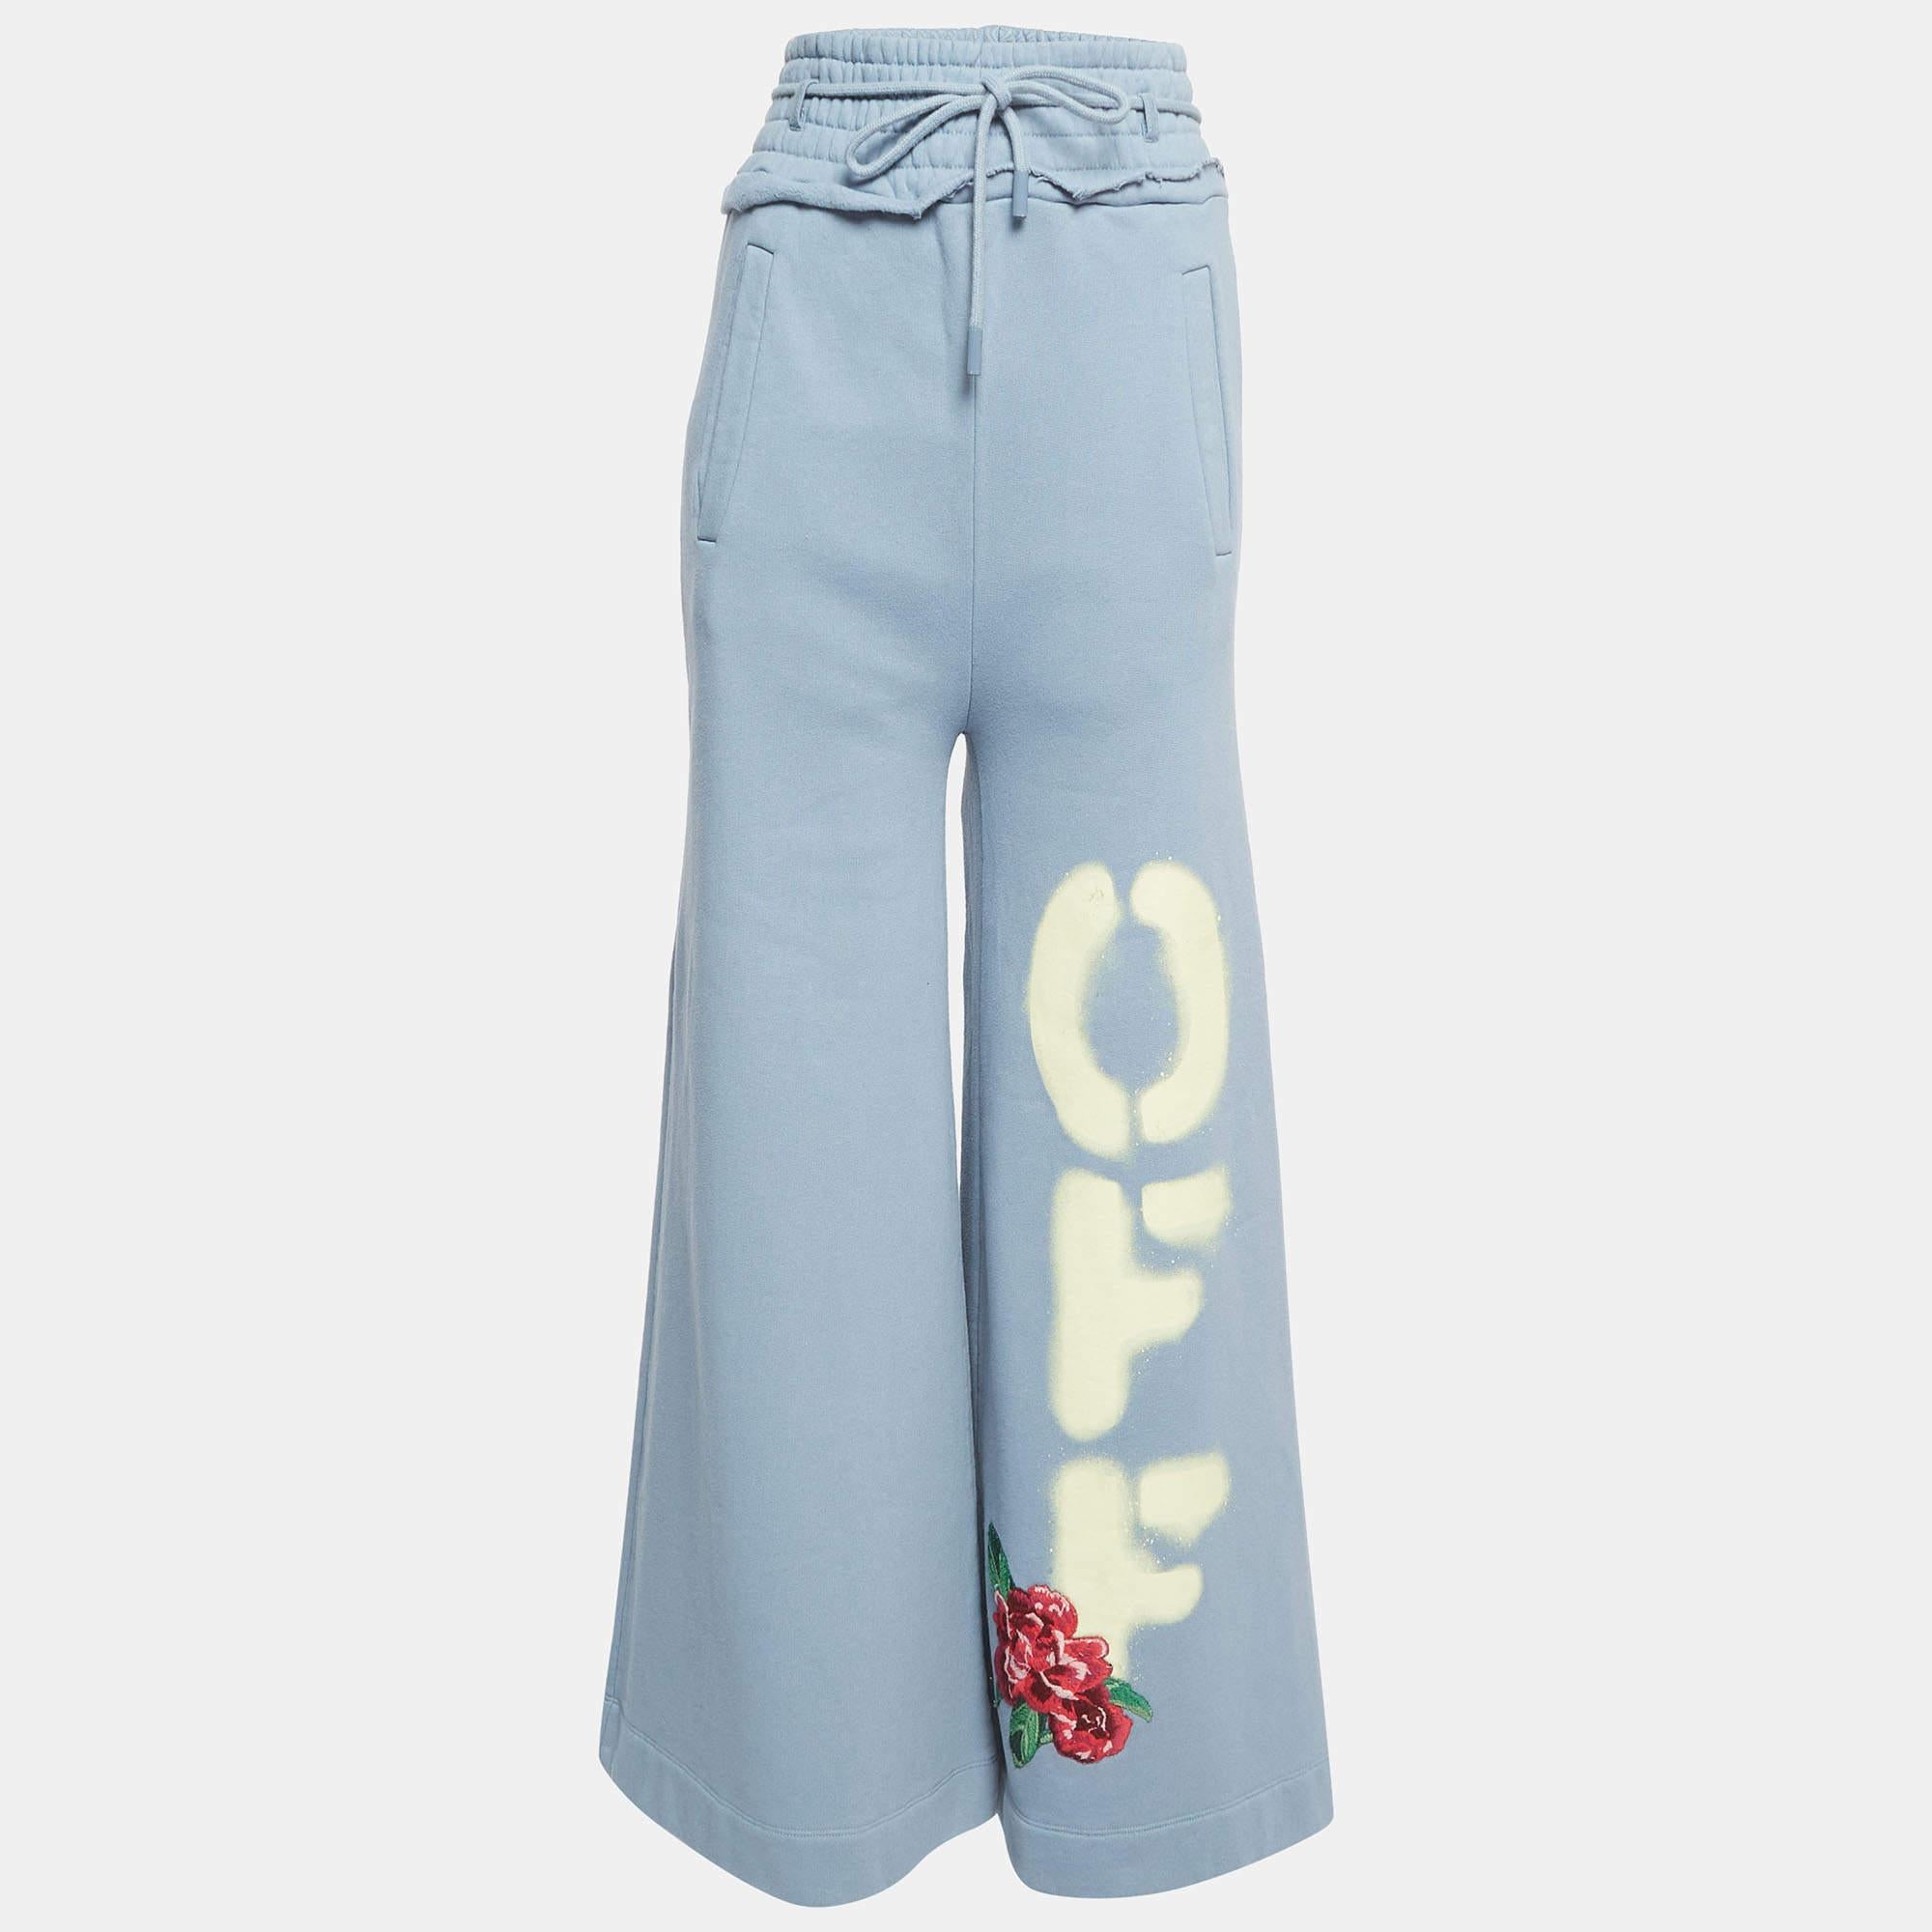 Whether you want just to lounge around or go out to run errands, these Off-White sweatpants will be a stylish pick and will make you feel comfortable all day. It has been made using cotton.

